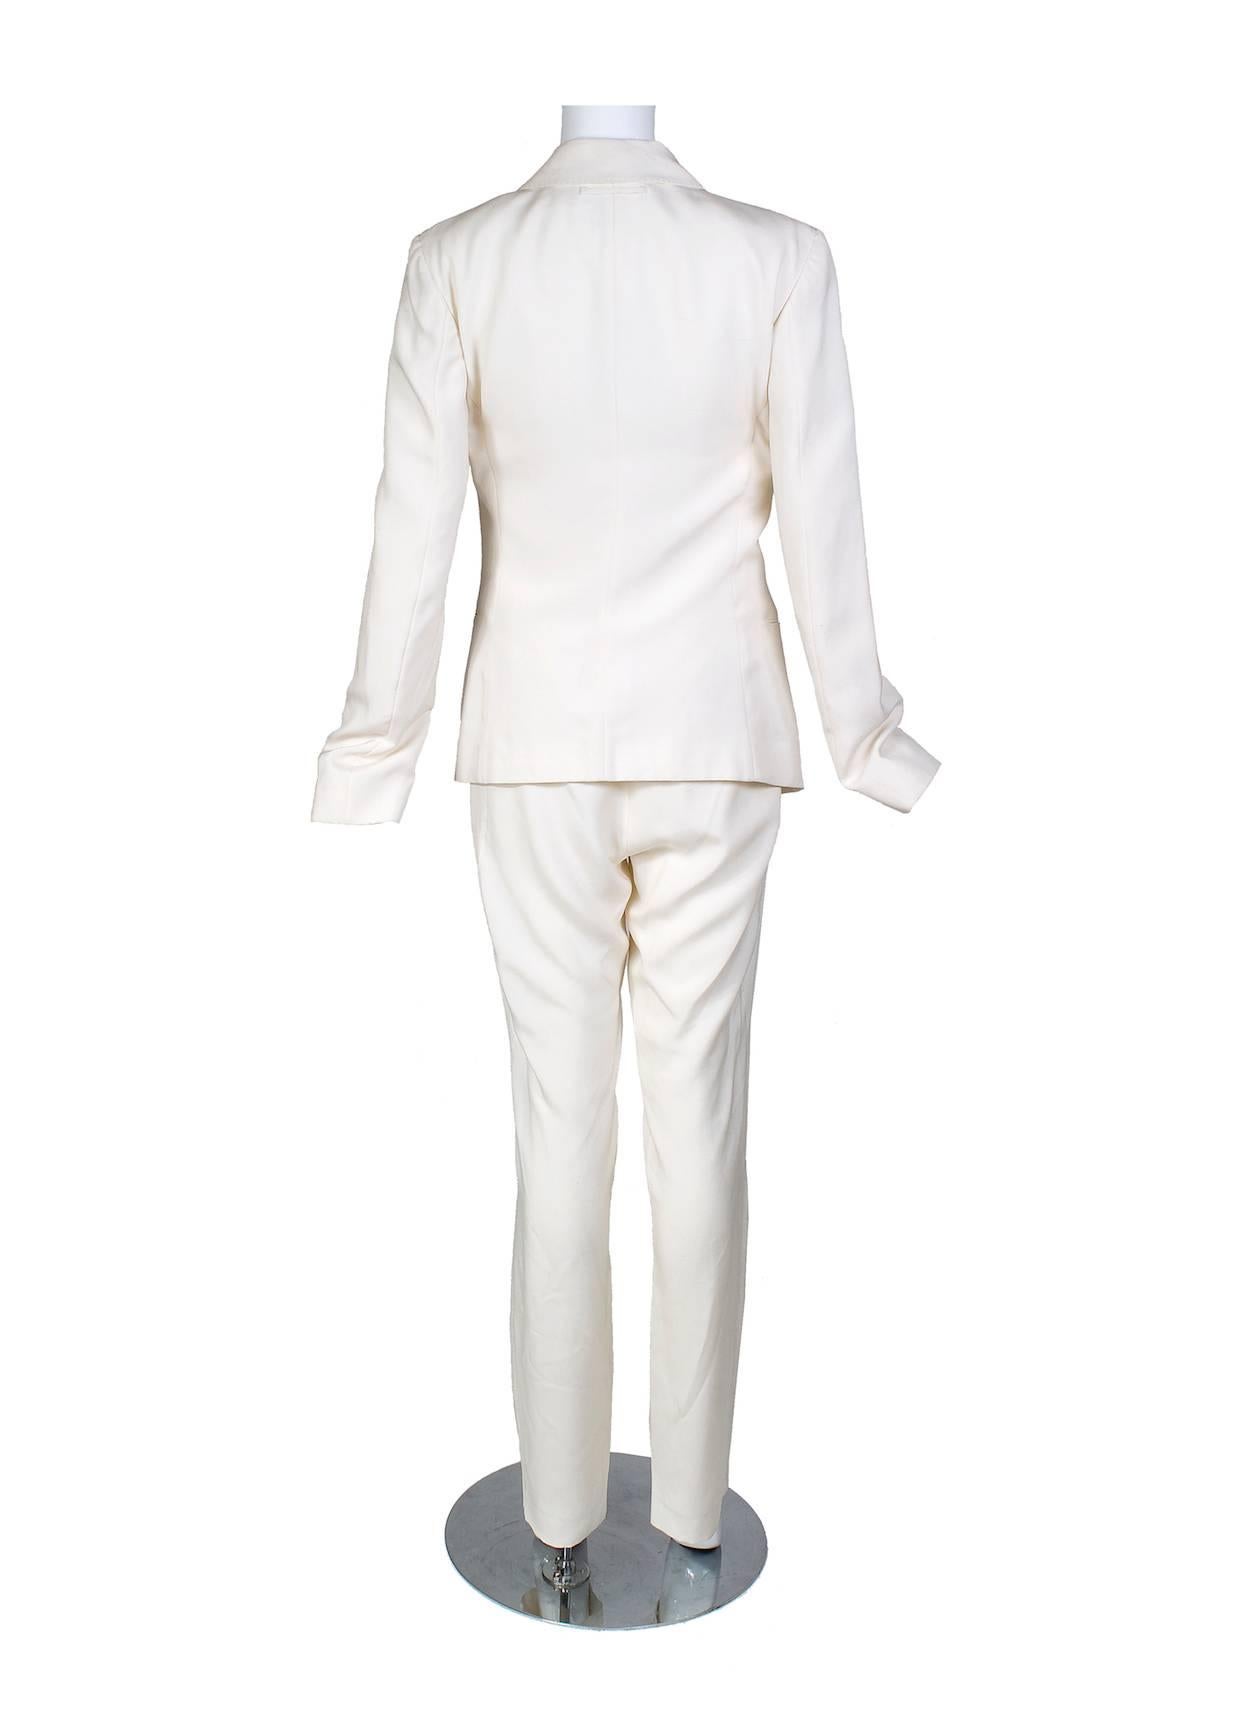 This is a cream colored silk suit by Jean Paul Gaultier c. late 1980s/early 1990s.  It features a matching bra with front buttons that can be attached to the inside of the blazer.  Pieces may also be sold separately.  

Jacket:
15.5 shoulder
24